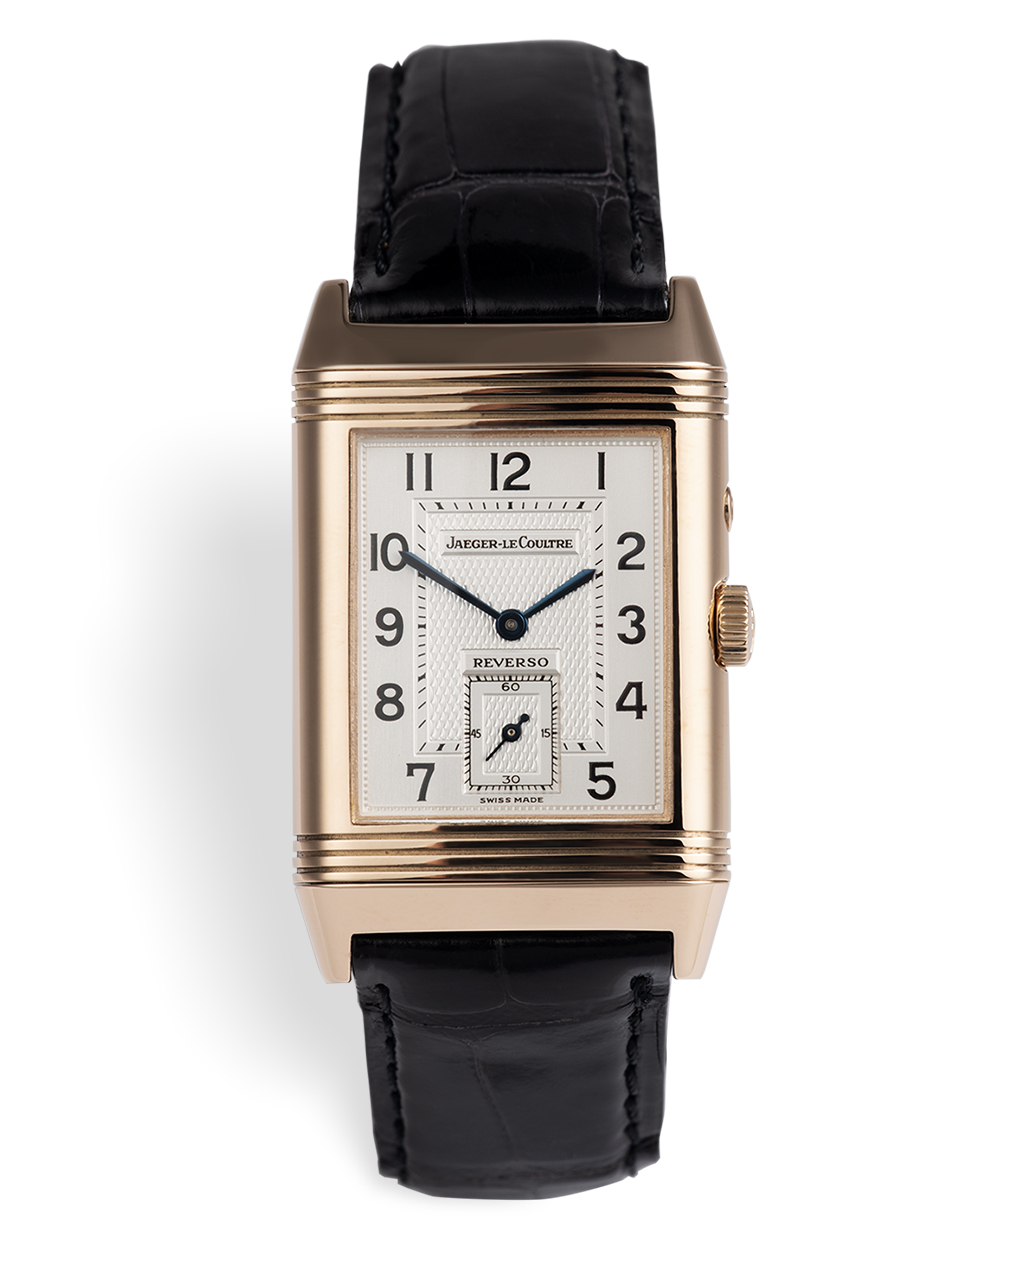 Jaeger-leCoultre Reverso Duo Watches | ref 270.2.54 | Night & Day ...